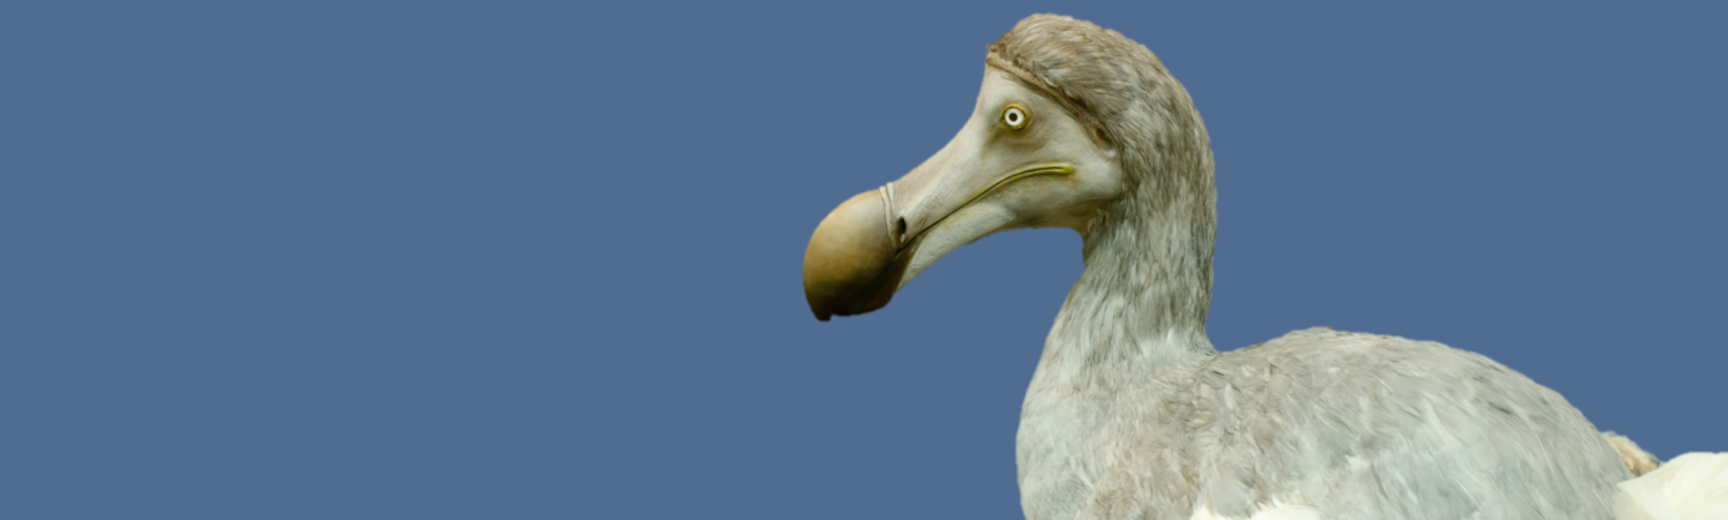 Taxidermy dodo at the Museum